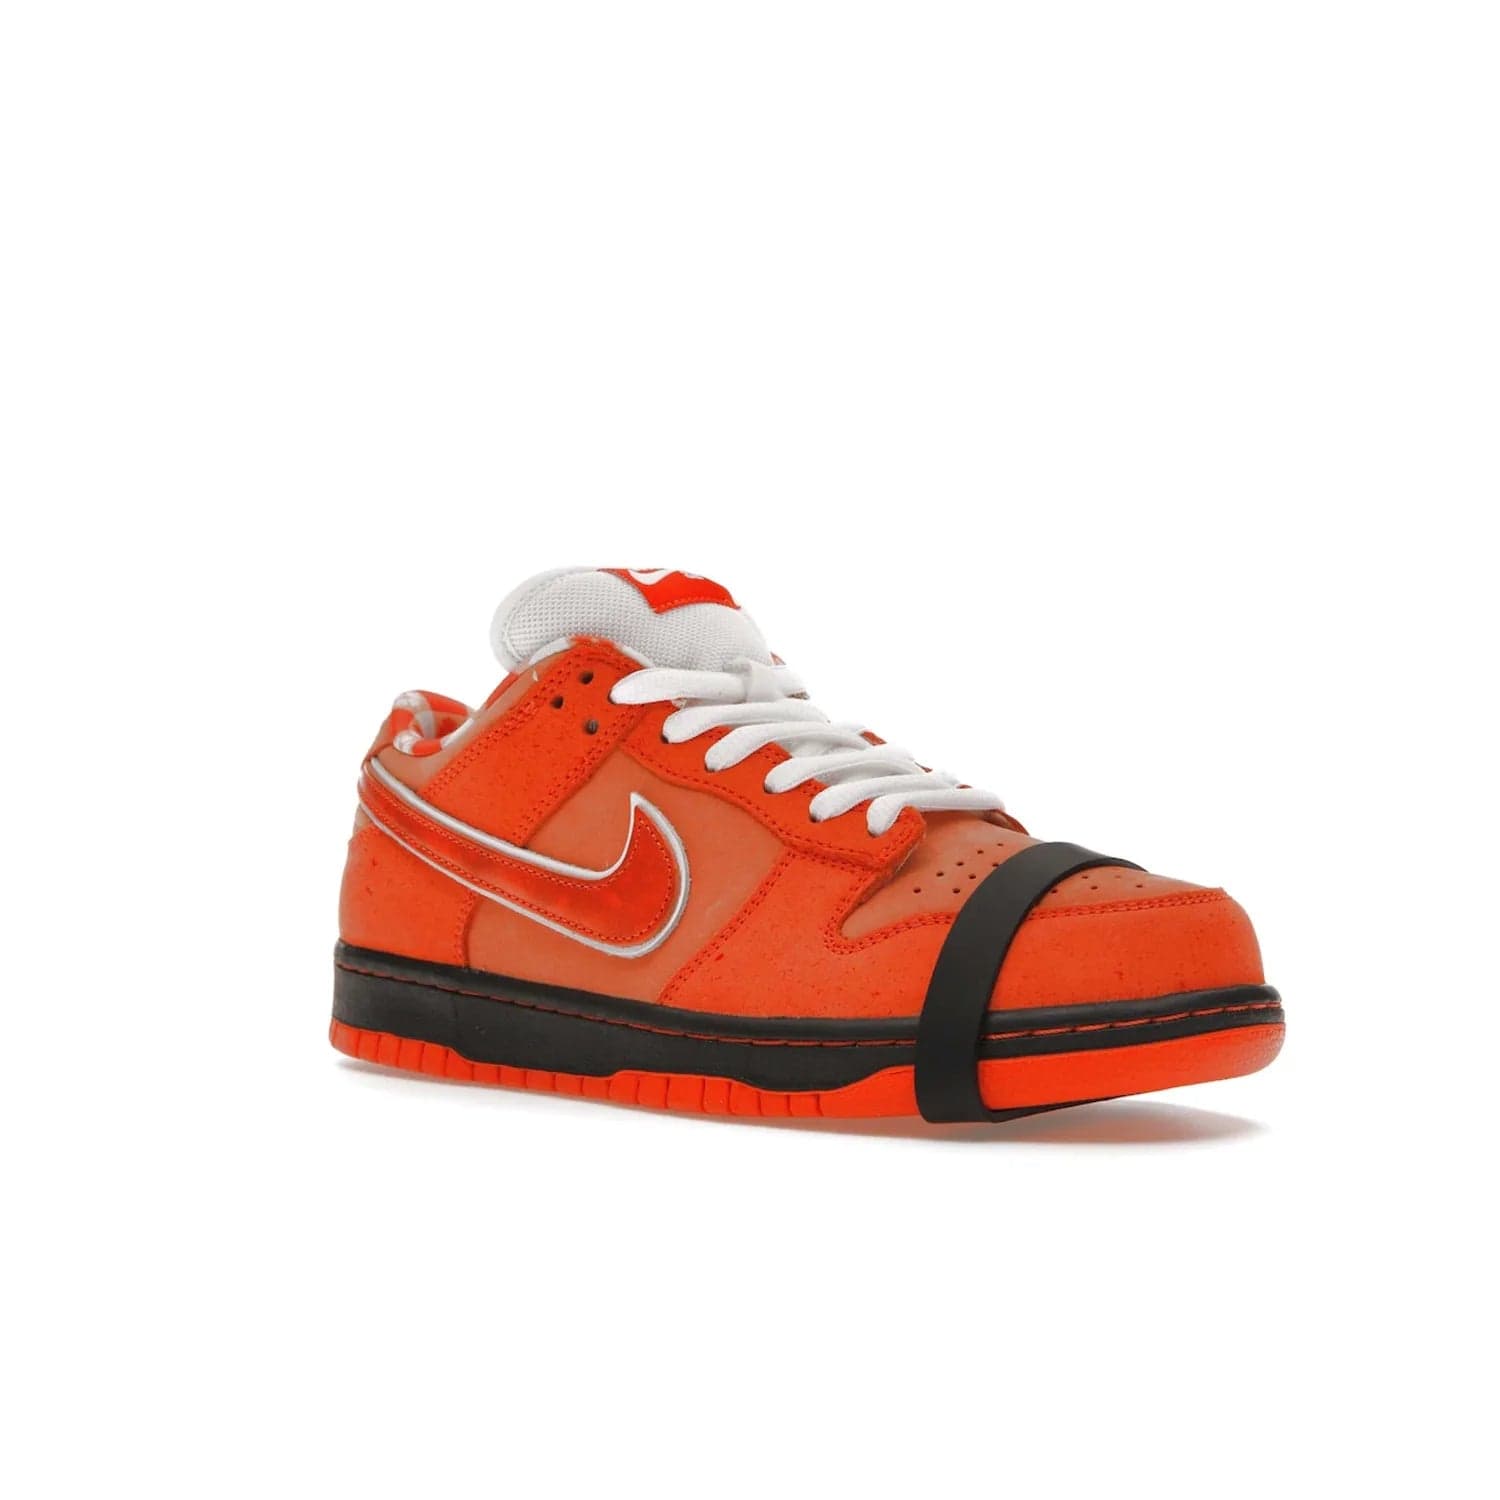 Nike SB Dunk Low Concepts Orange Lobster - Image 5 - Only at www.BallersClubKickz.com - Make a statement with the Nike SB Dunk Low Concepts Orange Lobster. Variety of orange hues, nubuck upper, bib-inspired lining & rubber outsole create bold look & comfortable blend of style. Available December 20th, 2022.